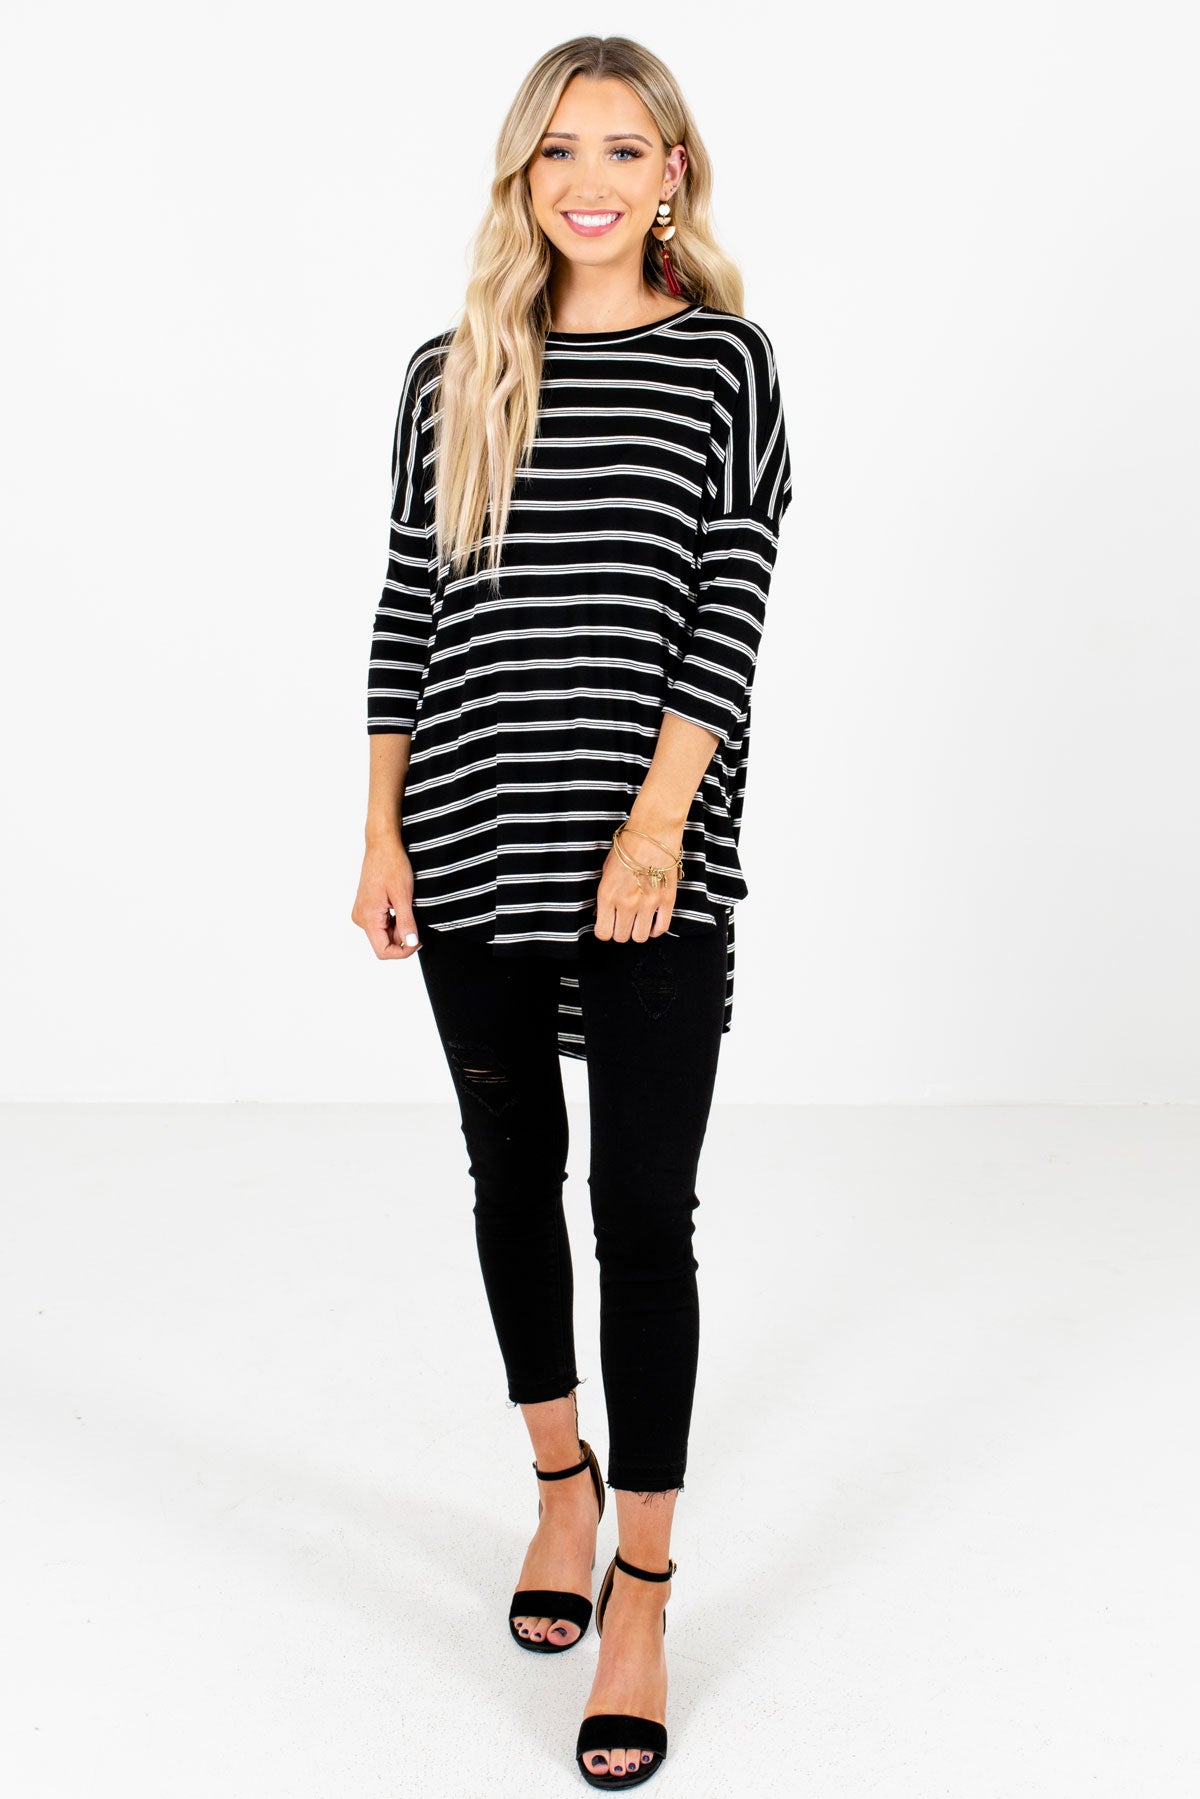 Just the Beginning Black Striped Top | Boutique Tops for Women - Bella ...